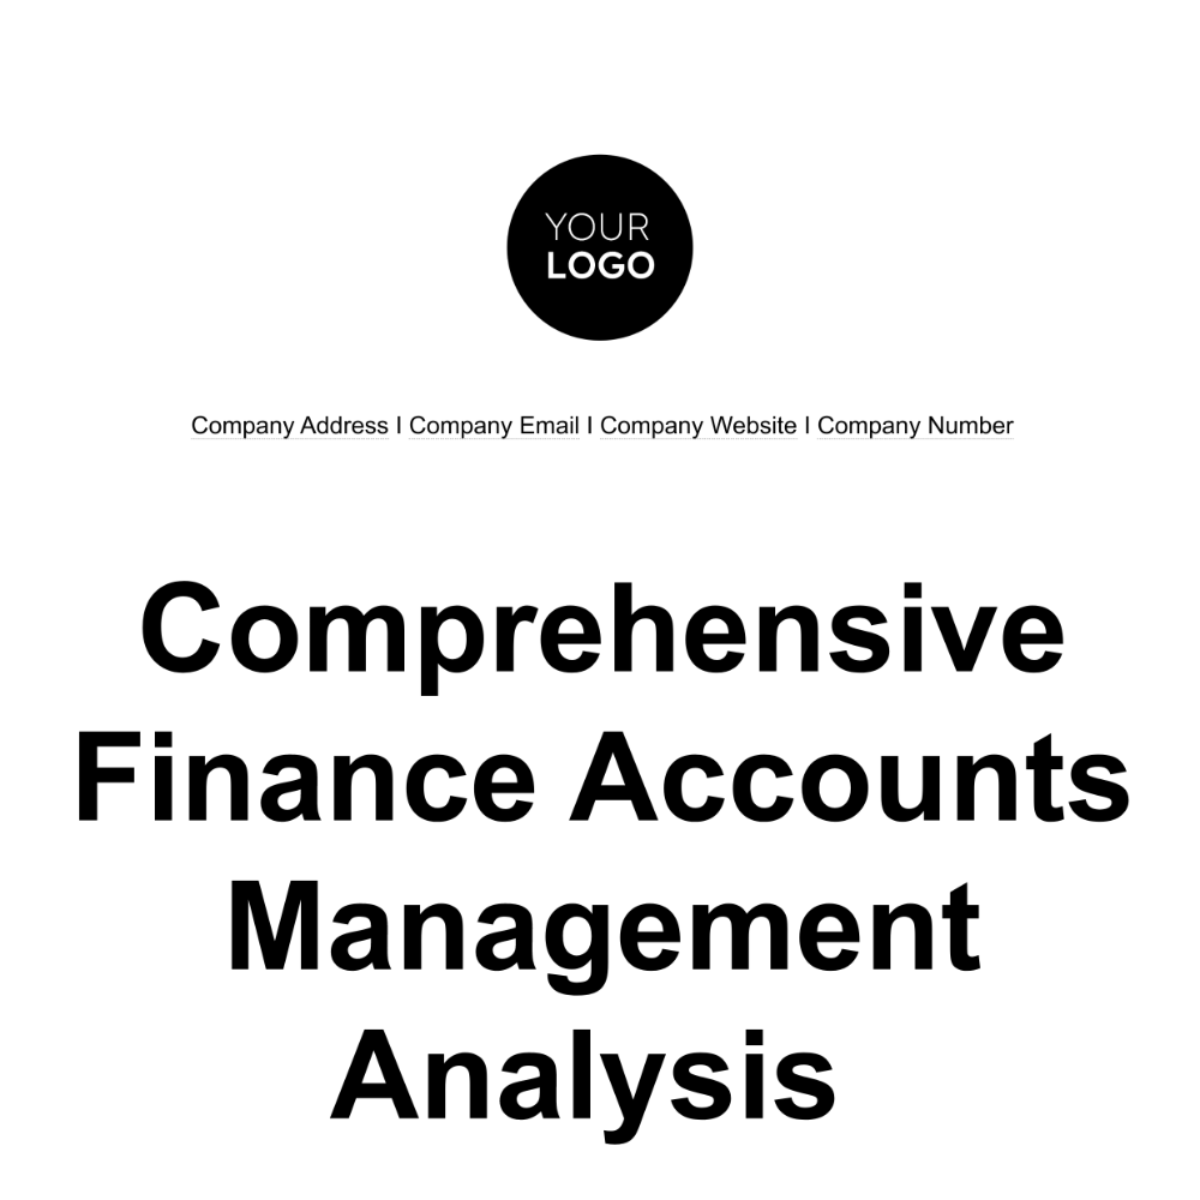 Free Comprehensive Finance Accounts Management Analysis Template